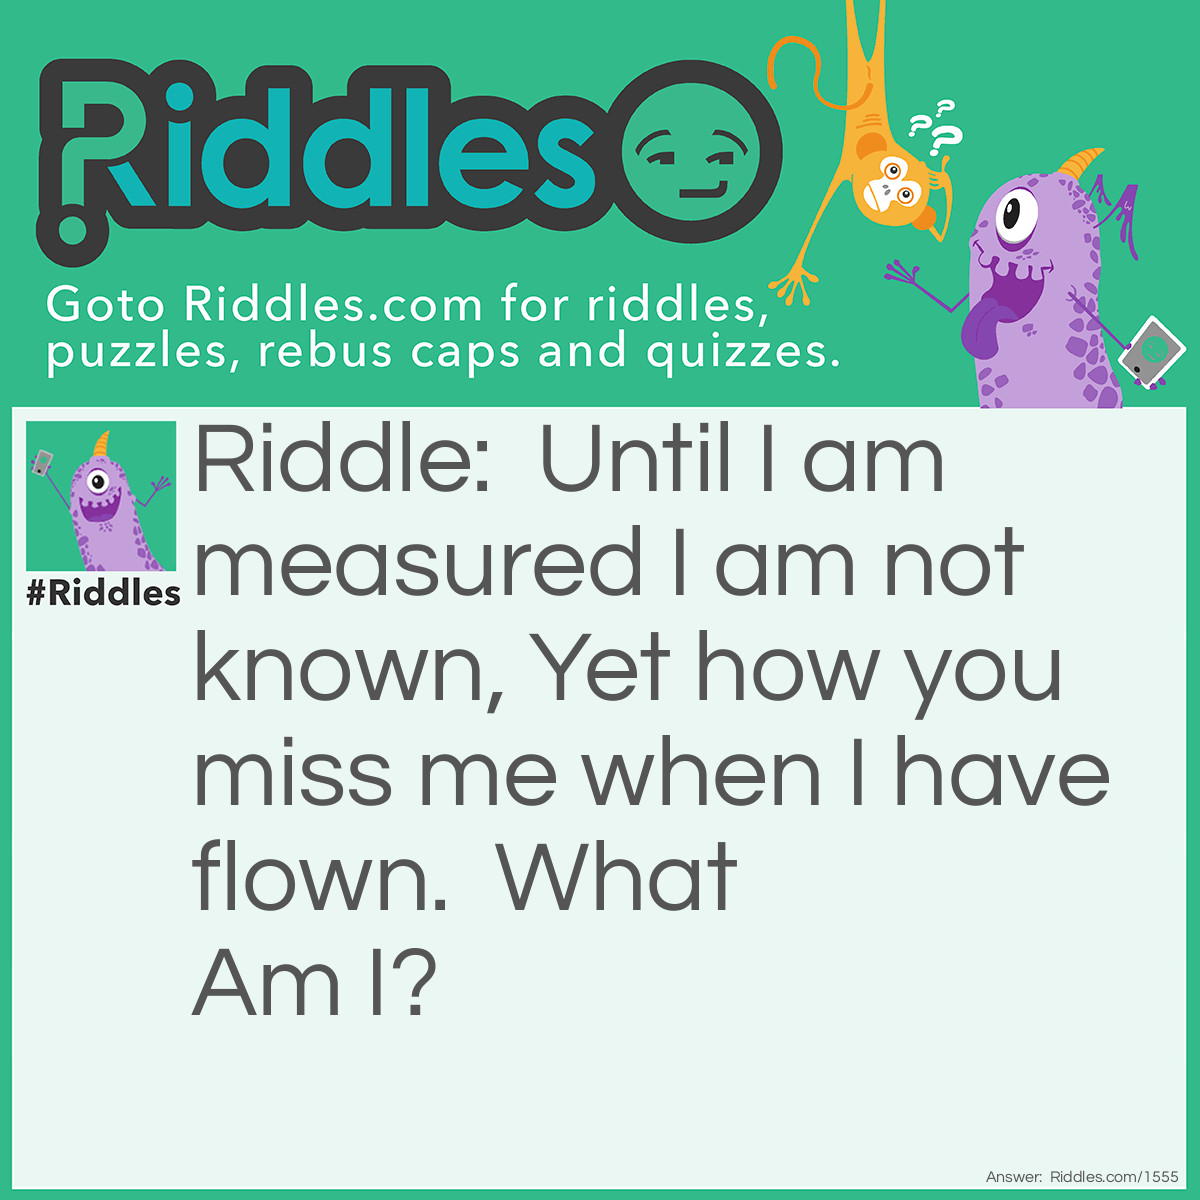 Riddle: Until I am measured I am not known, Yet how you miss me when I have flown. What Am I? Answer: Time.